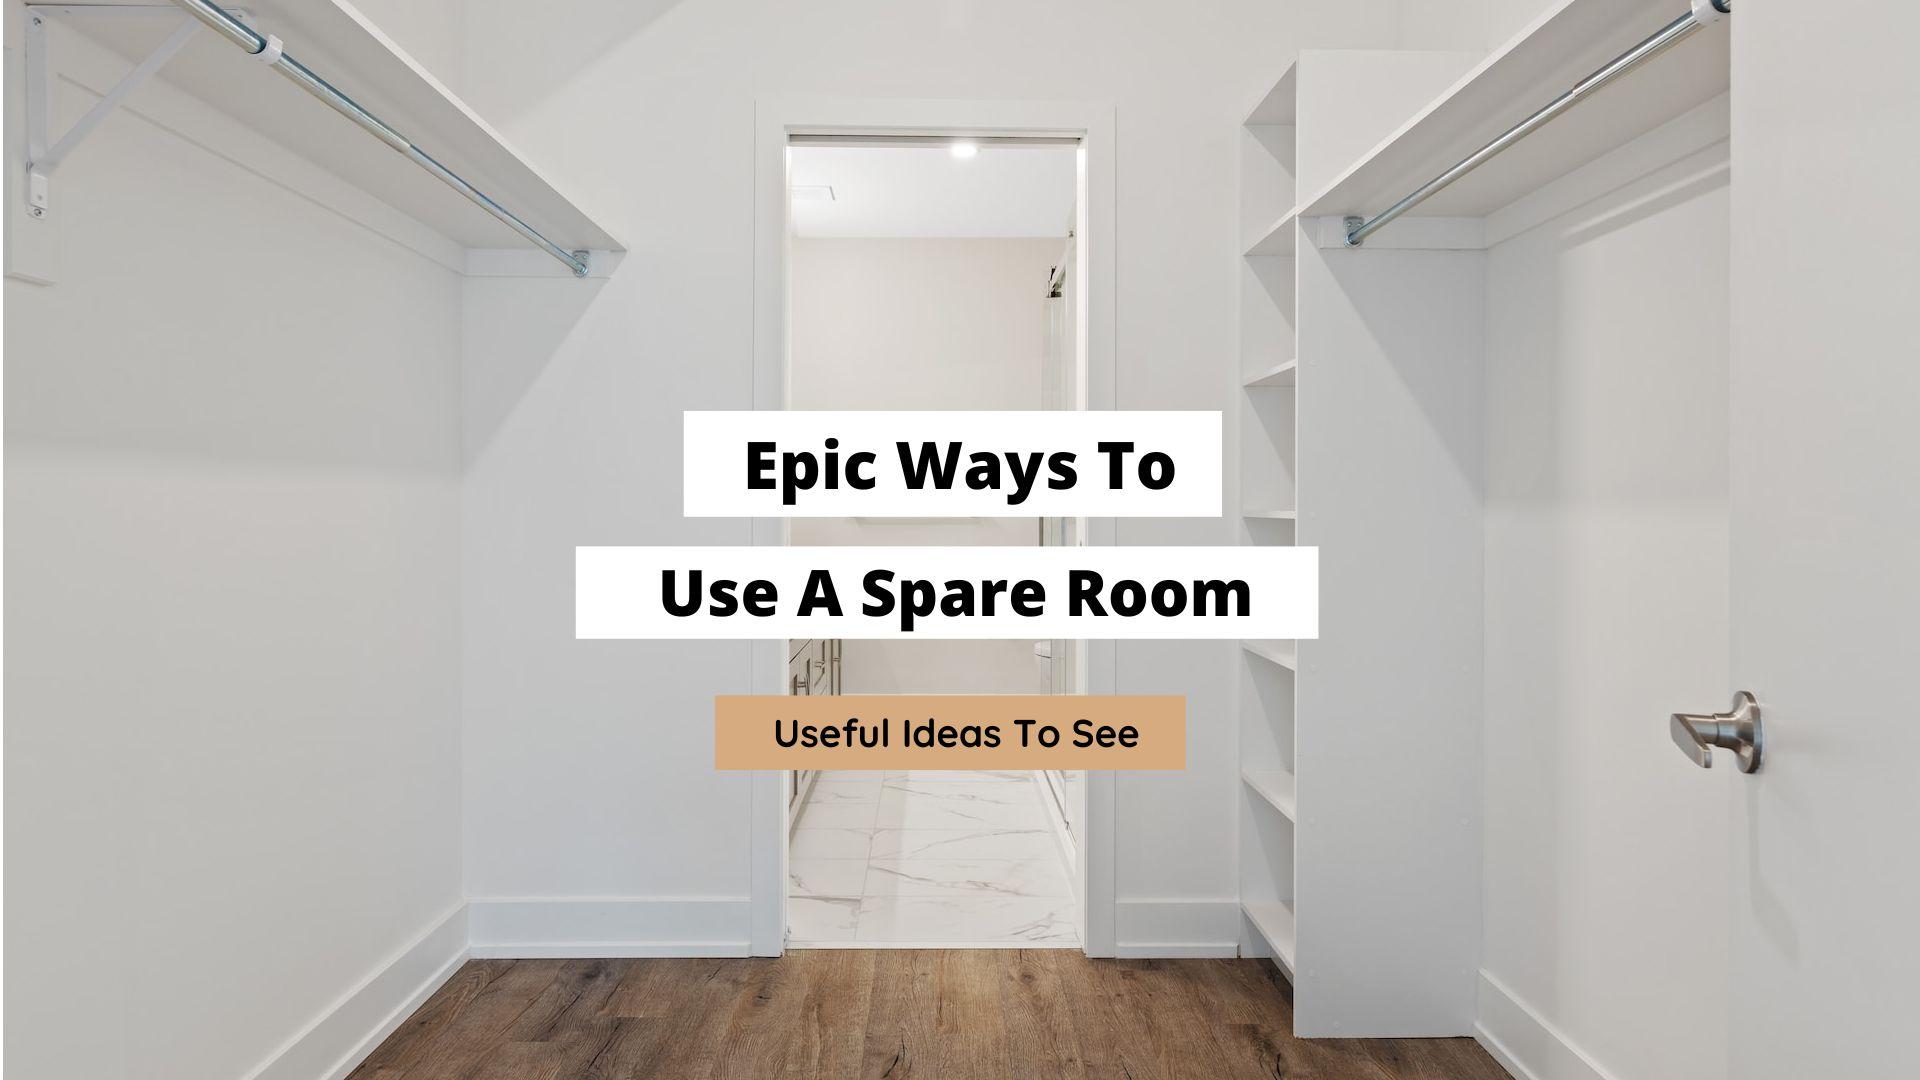 What to Do With a Spare Room